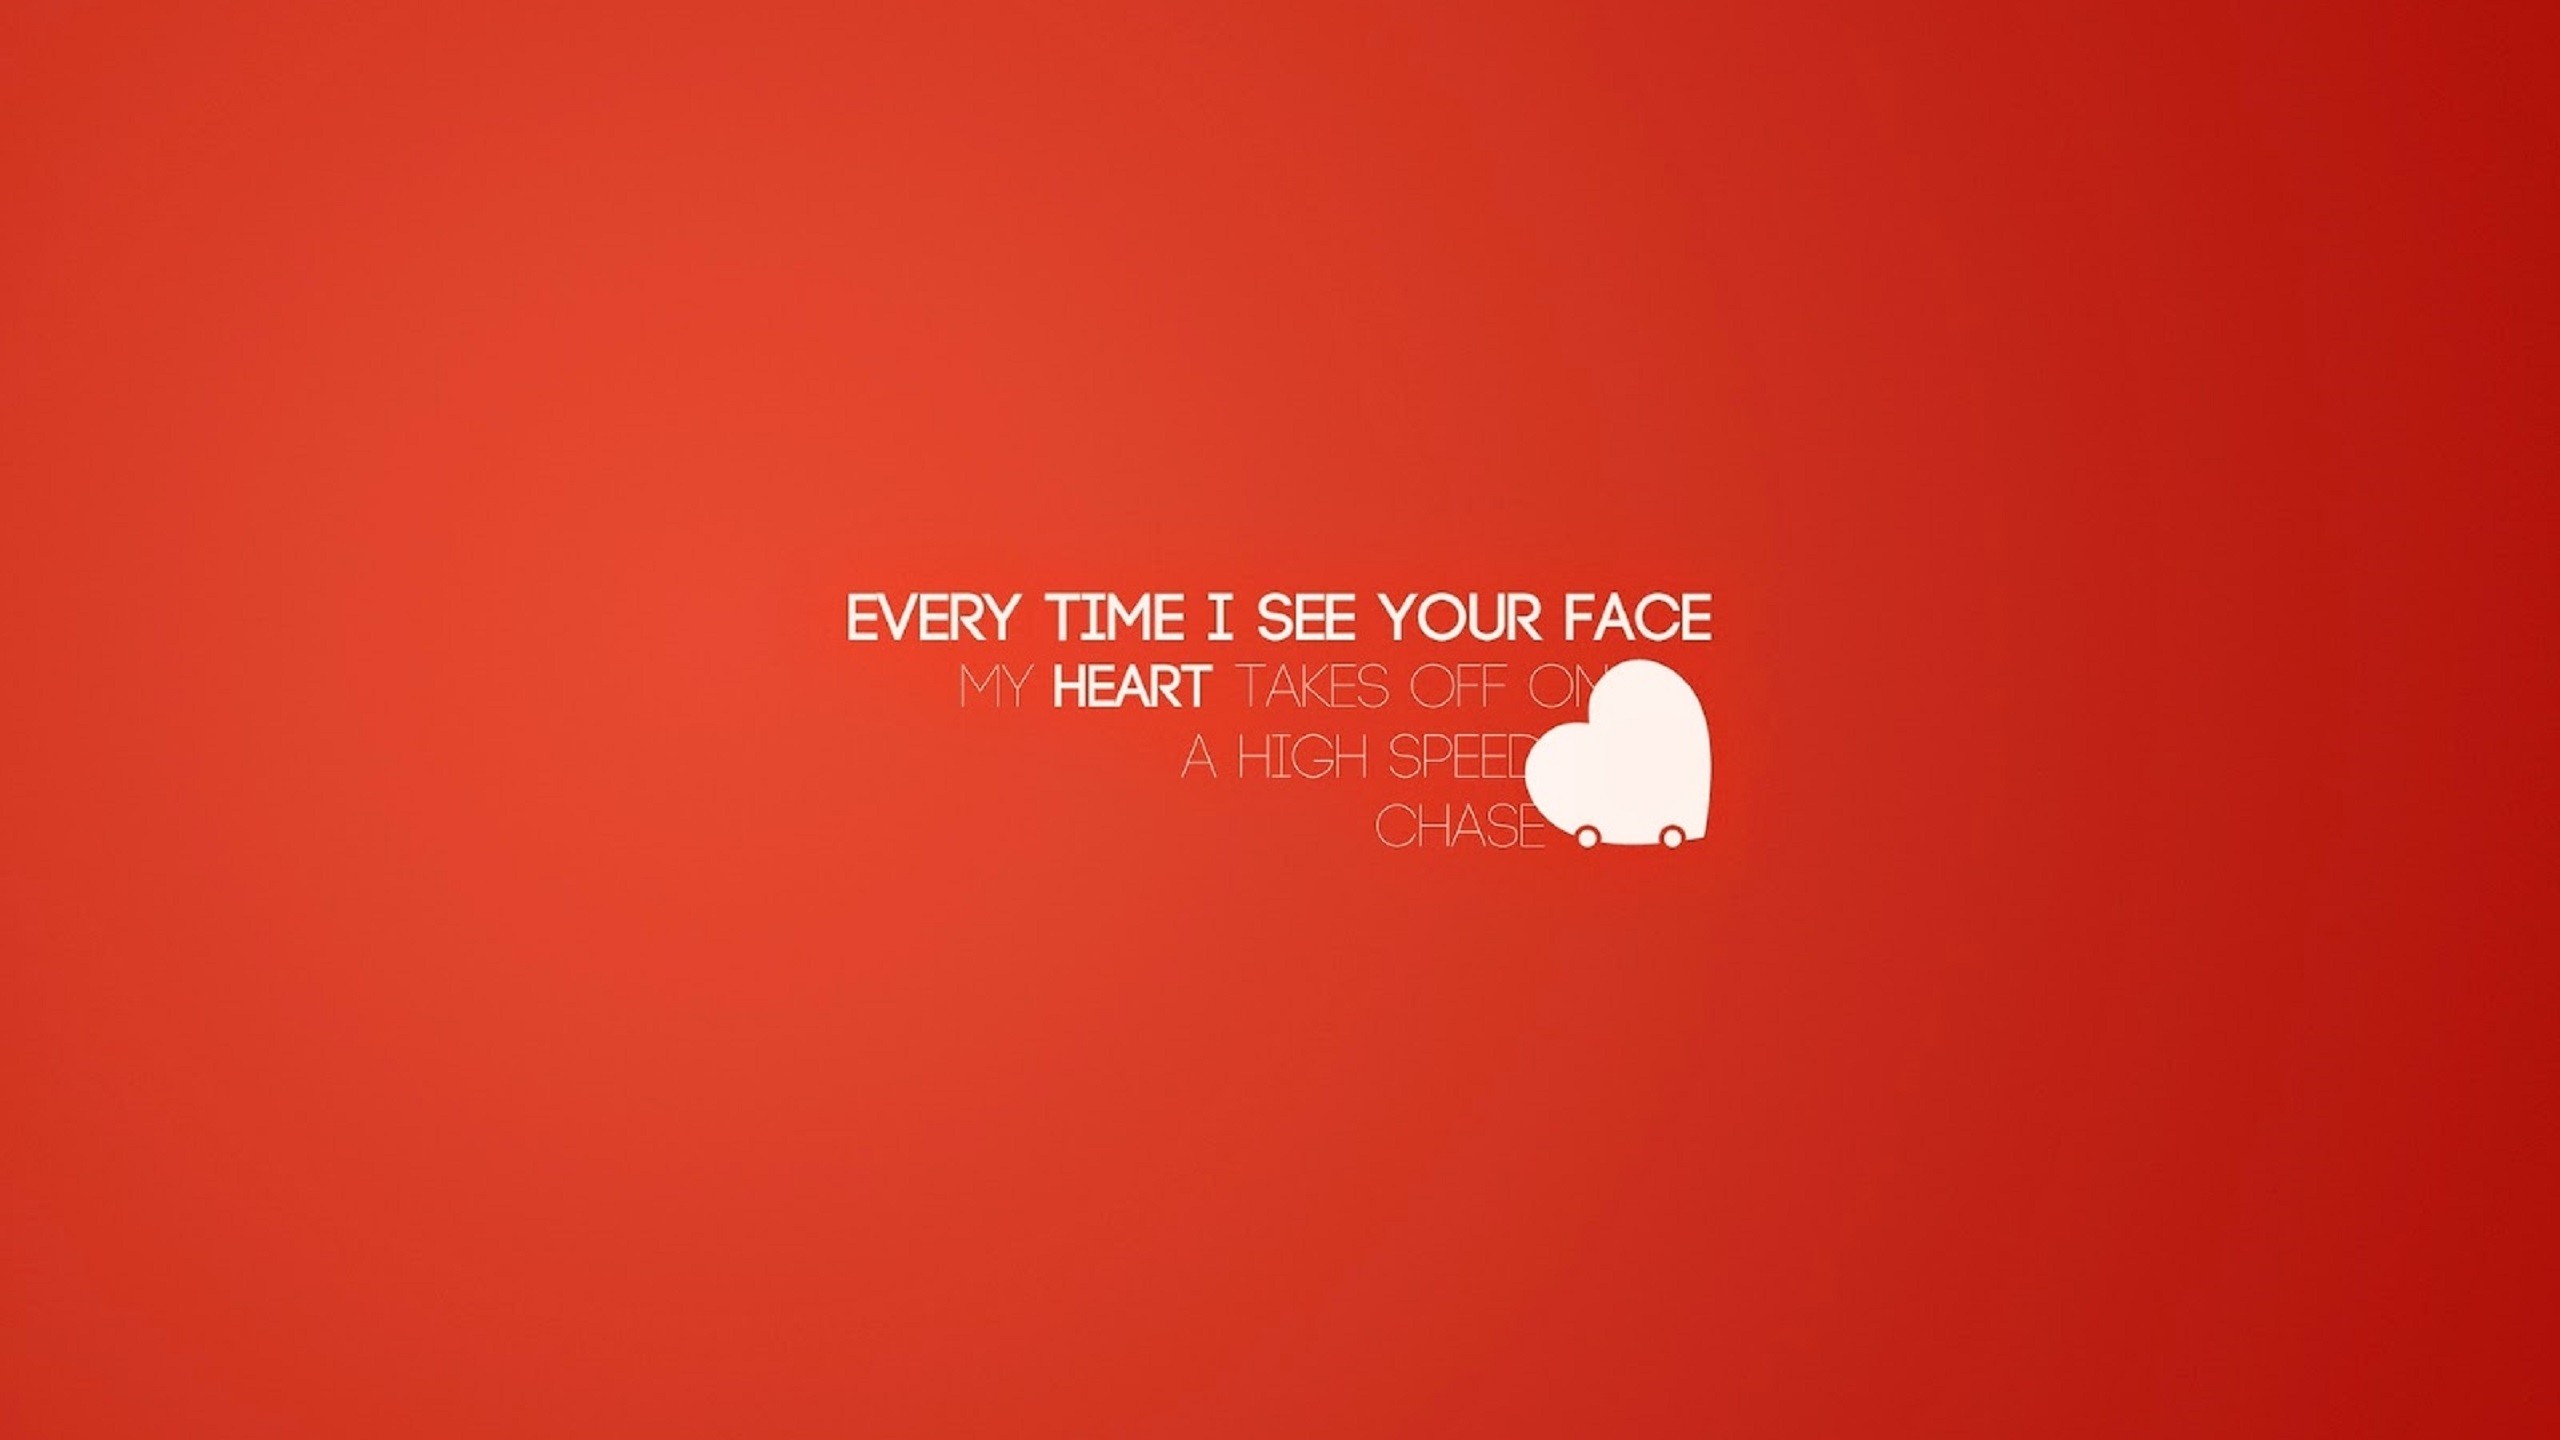 True Love Quotation Wallpaper 
 Data-src - Background Hd Images With Quotes - HD Wallpaper 